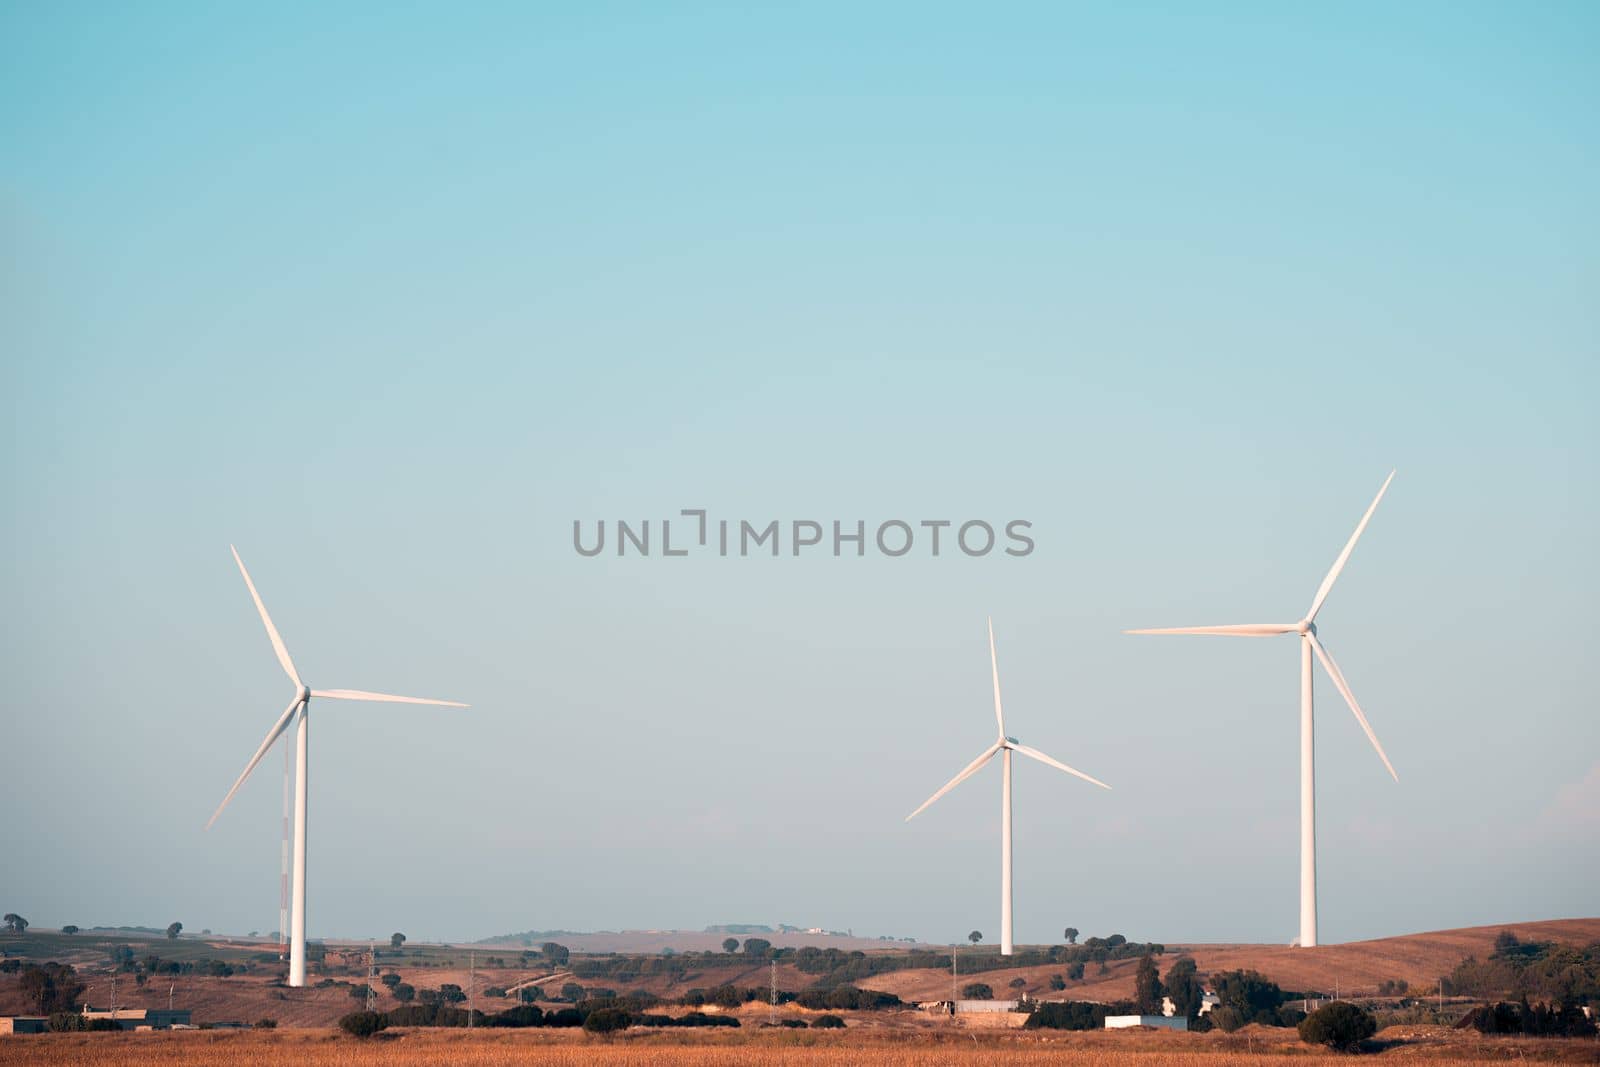 three windmills produce clean energy in a wind farm. They are in a rural environment surrounded by crops and trees, the sky is clean and clear. Copy space